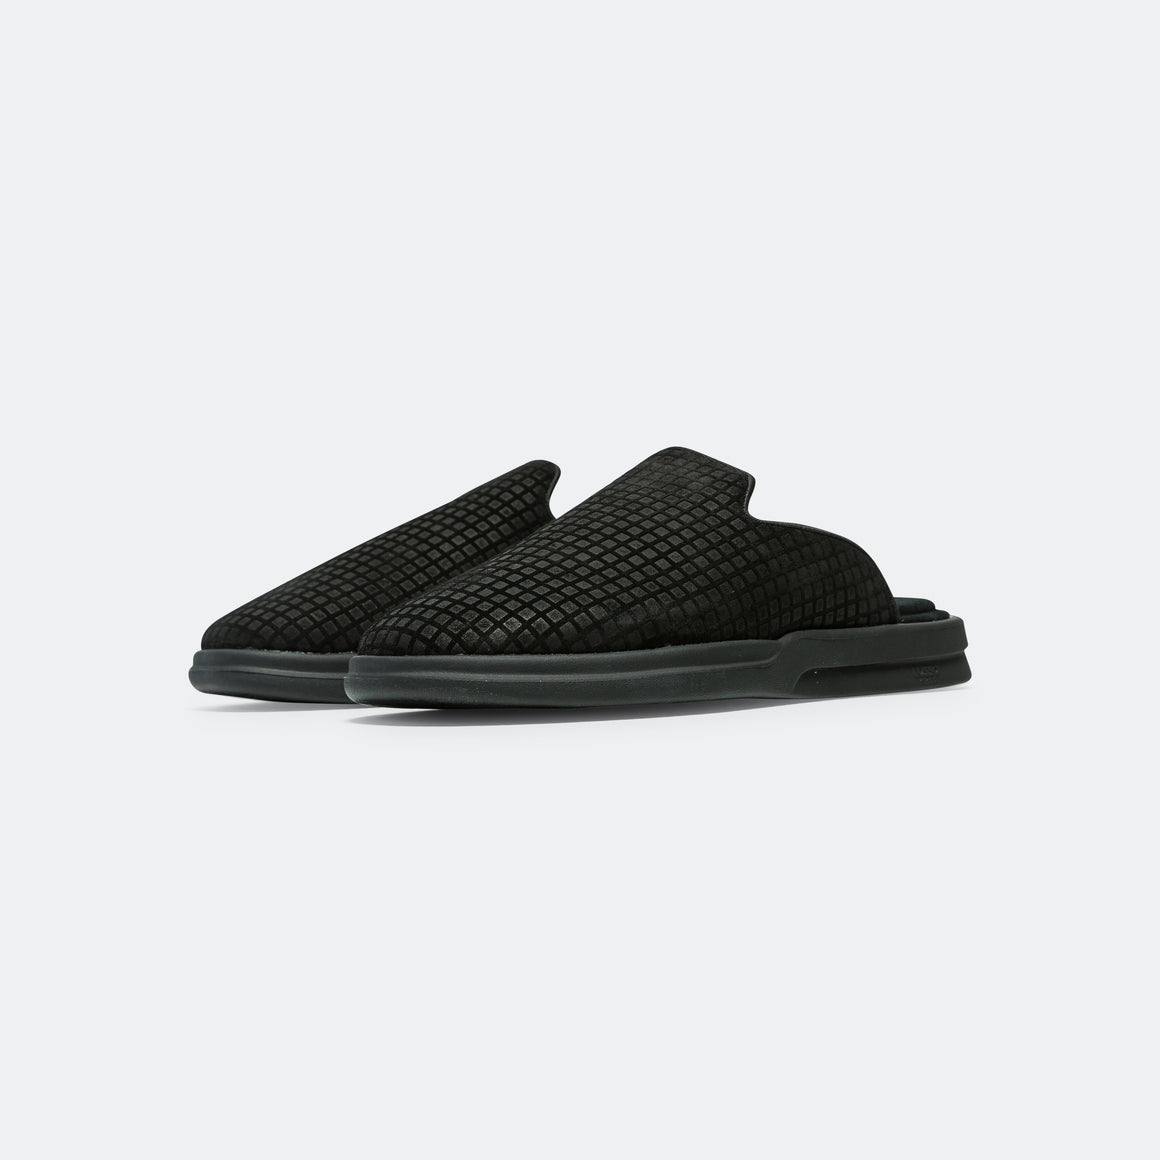 Lusso Cloud - Pelli Waffle Suede - Jet Black/Matte - UP THERE